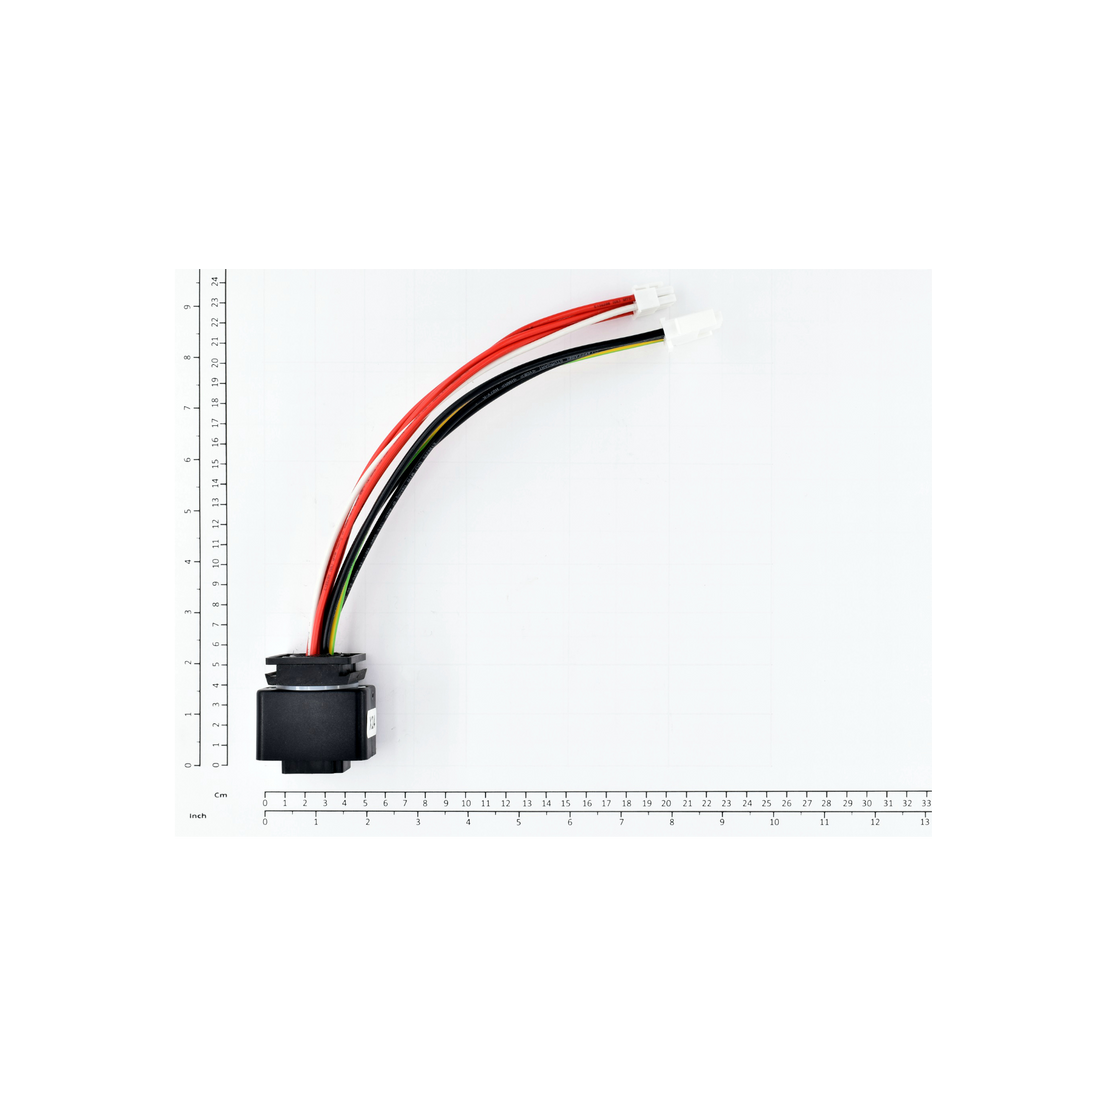 R&M Parts - Cable Interface, Part Number: 3000006863